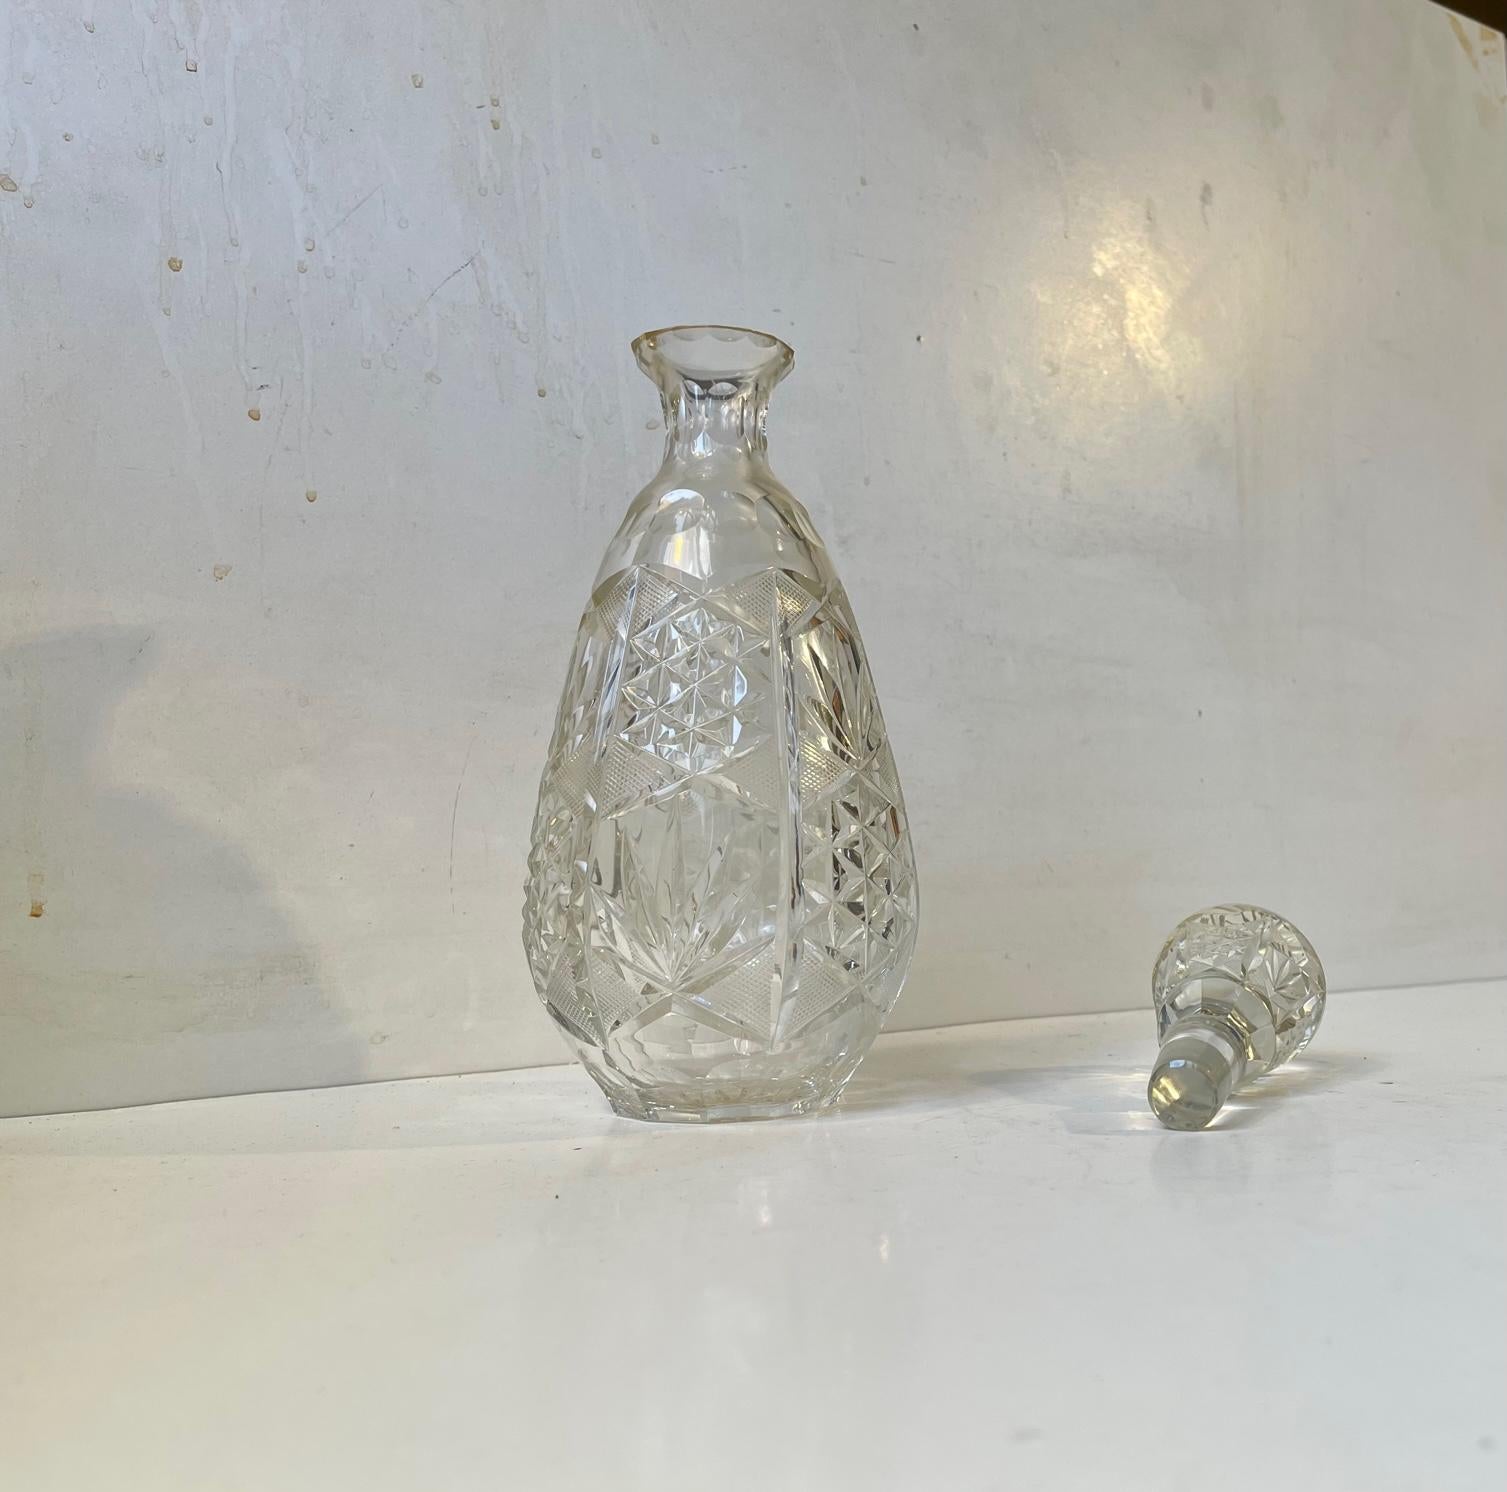 Cristal de Lorraine has an inheritance that goes back all the way to 1764. They have created crystal ware for names like Hermés, Cartier and St. Dupont. This 24% lead crystal decanter dates to the 1950s or early 1960s. Its many cut edges and